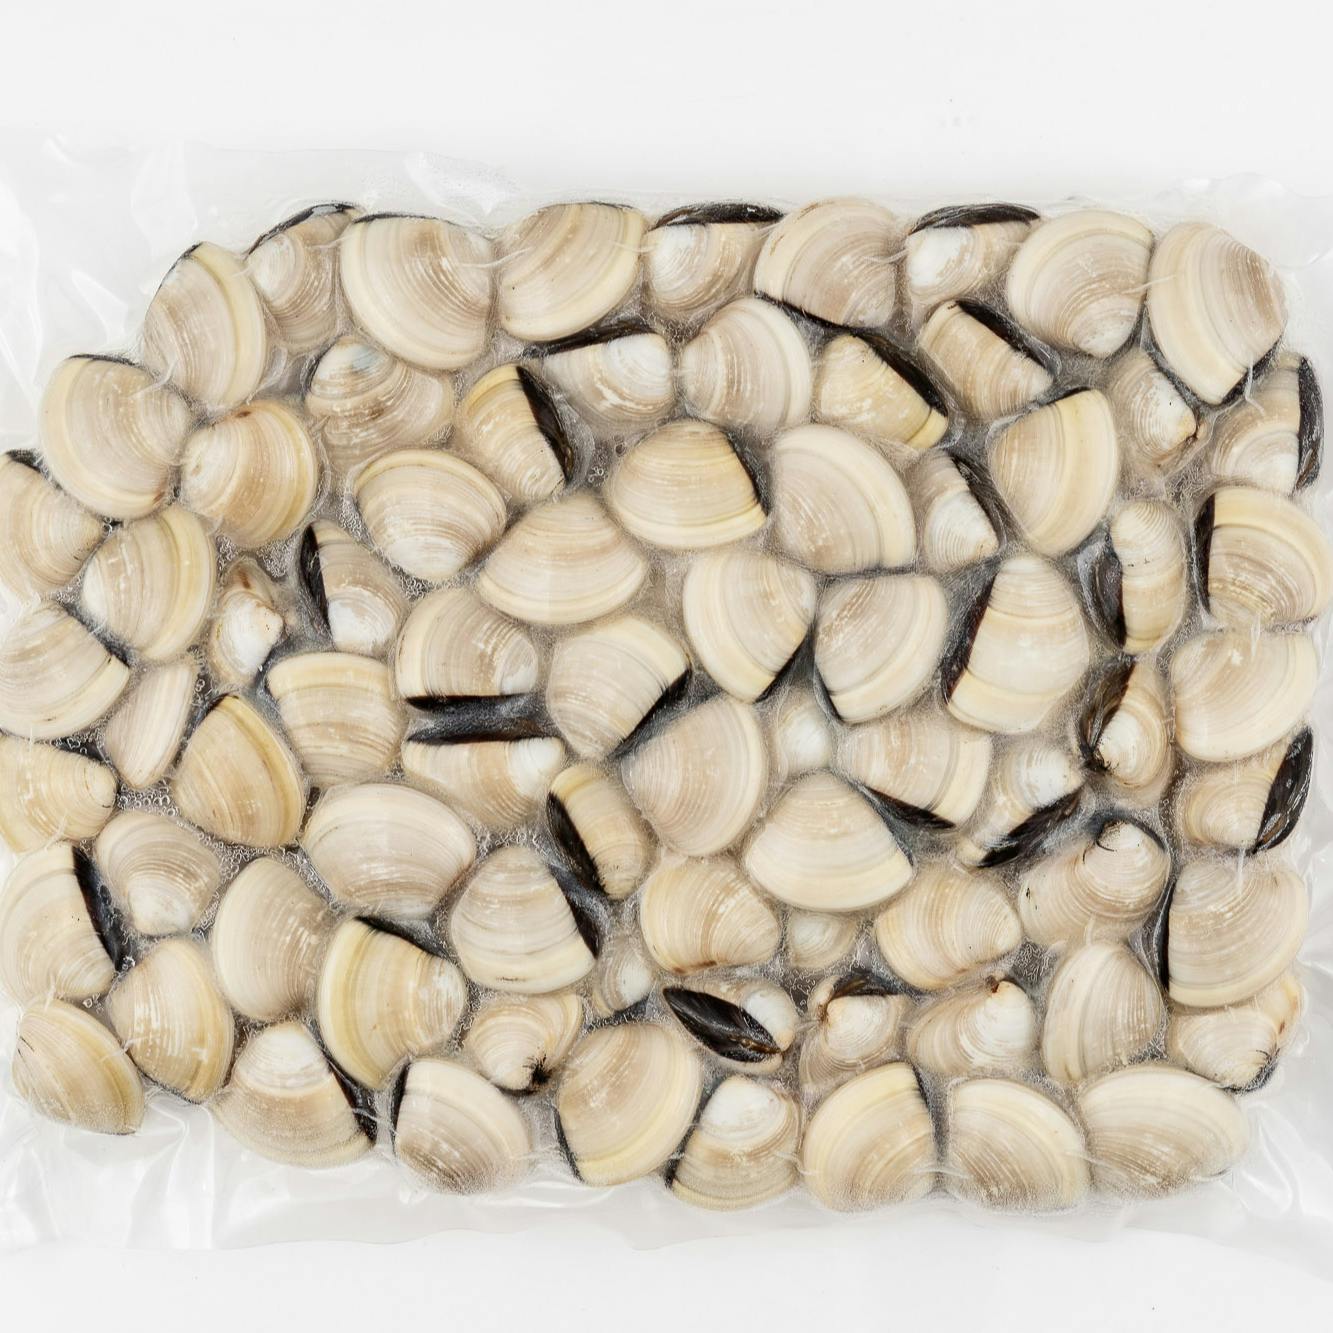 Frozen Clam supplier and exporters in Vietnam | Tanis Imex Co., Ltd